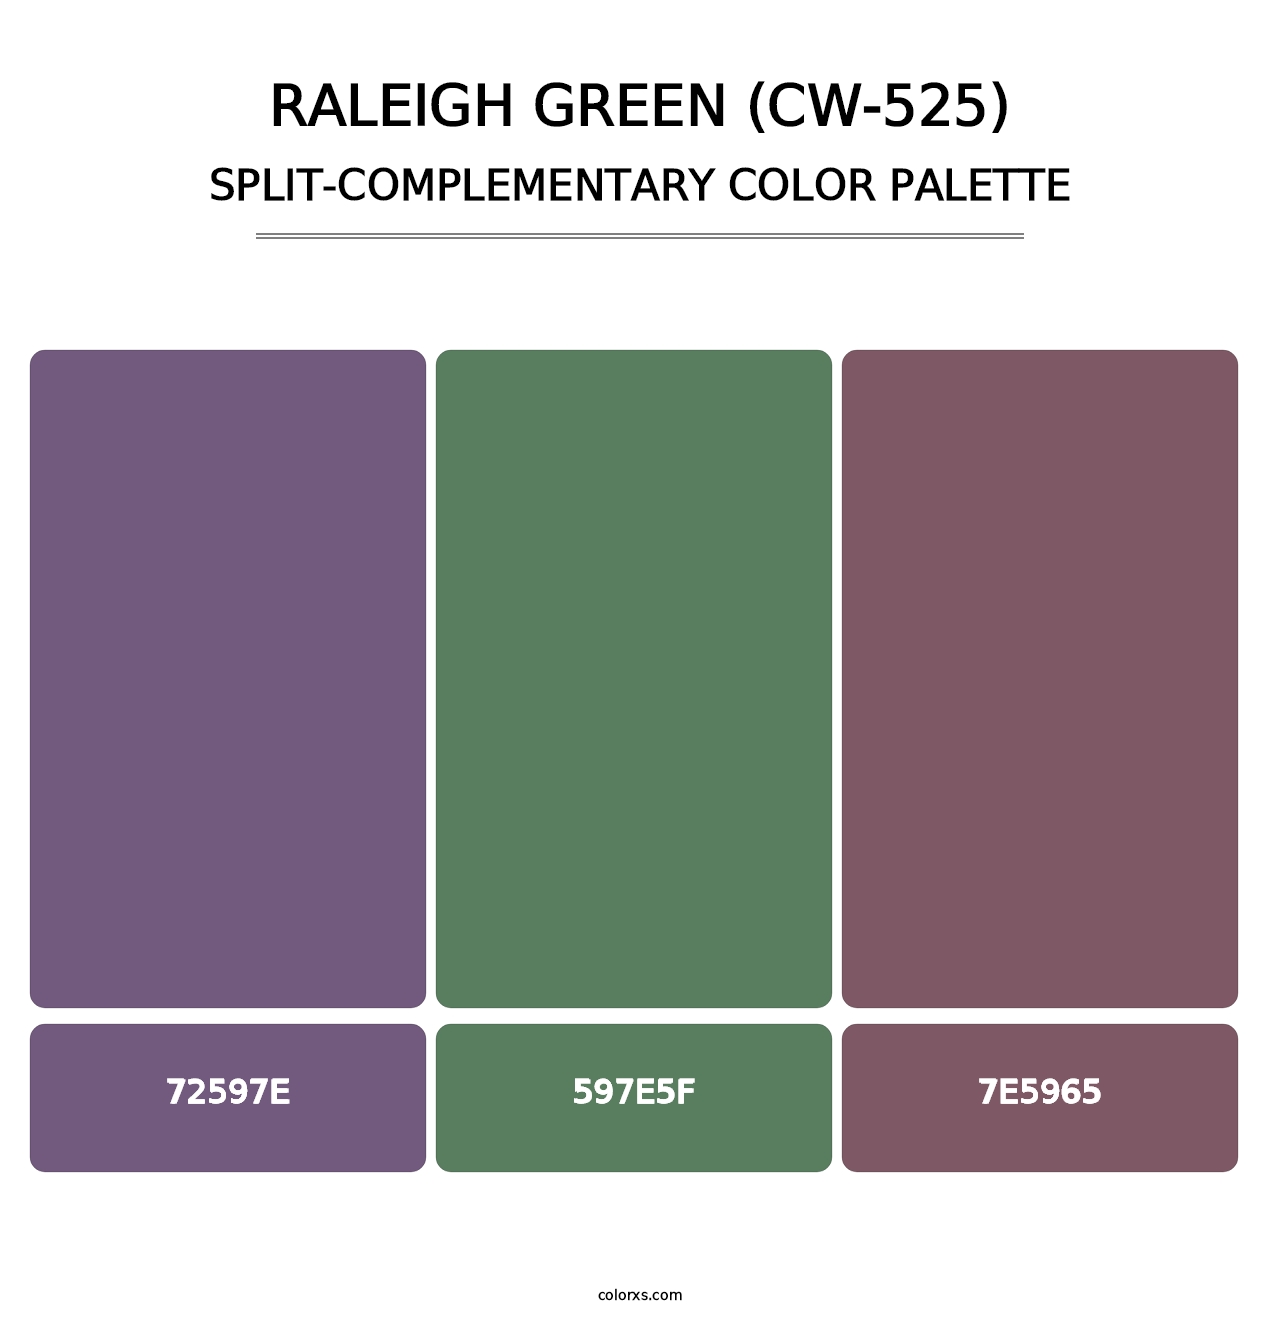 Raleigh Green (CW-525) - Split-Complementary Color Palette